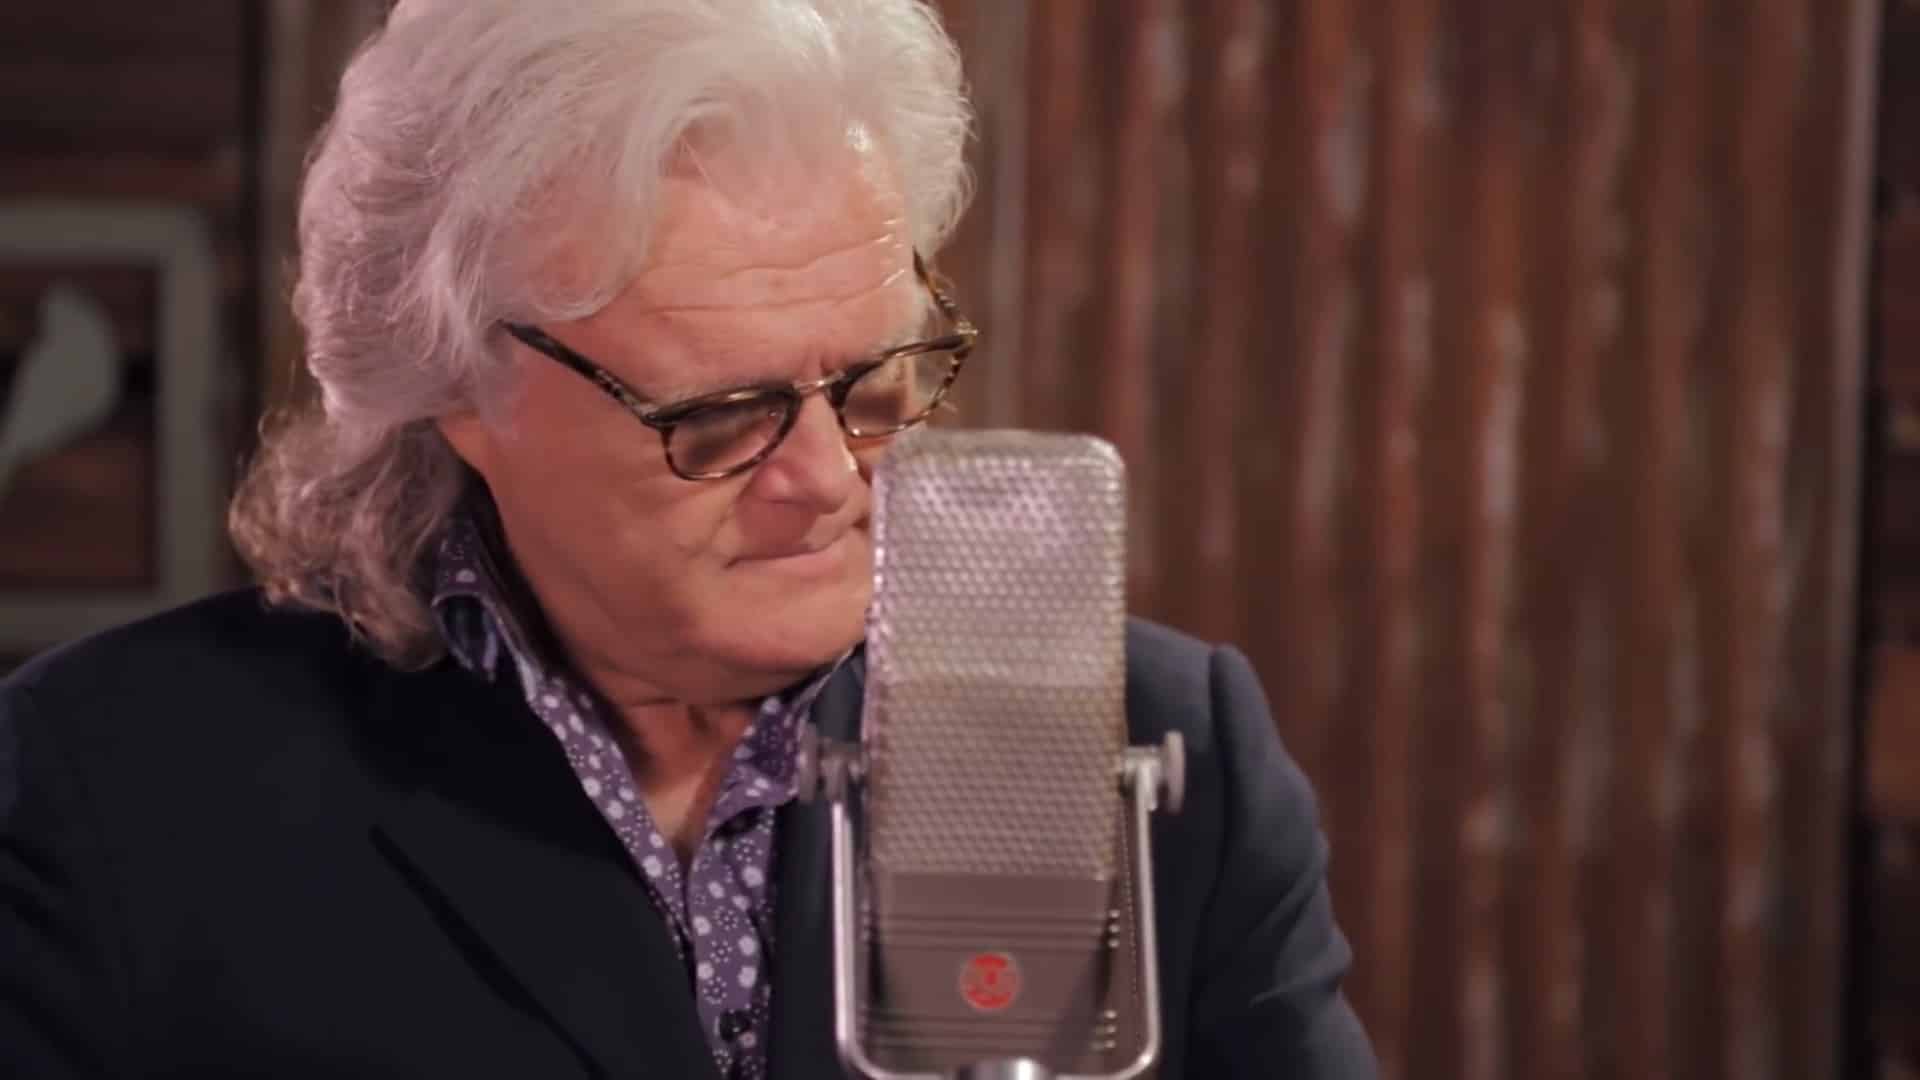 Ricky Skaggs Covers “There Goes My Everything”